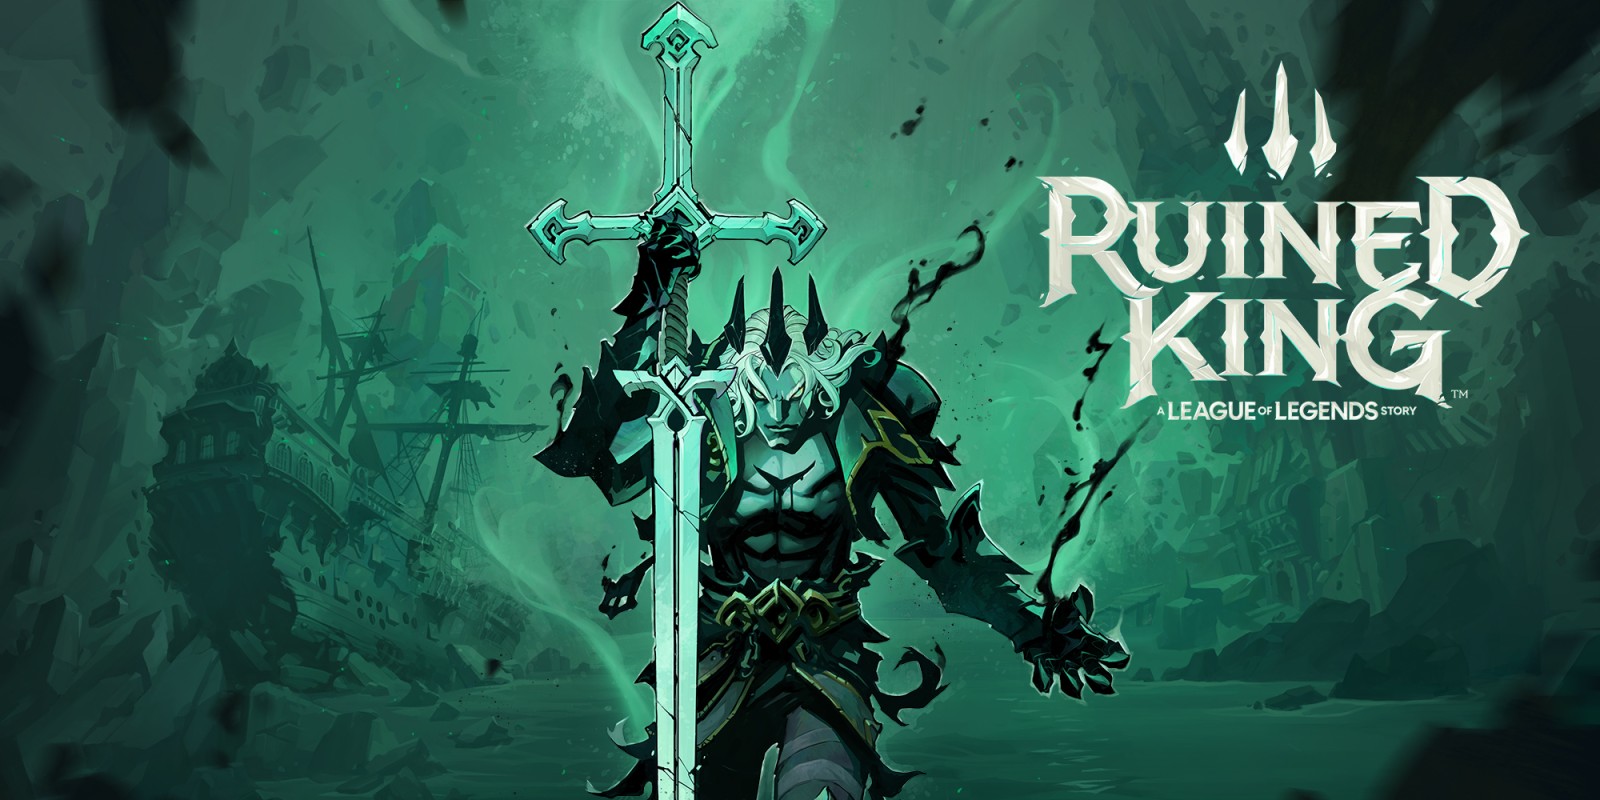 ruined king a league of legends story